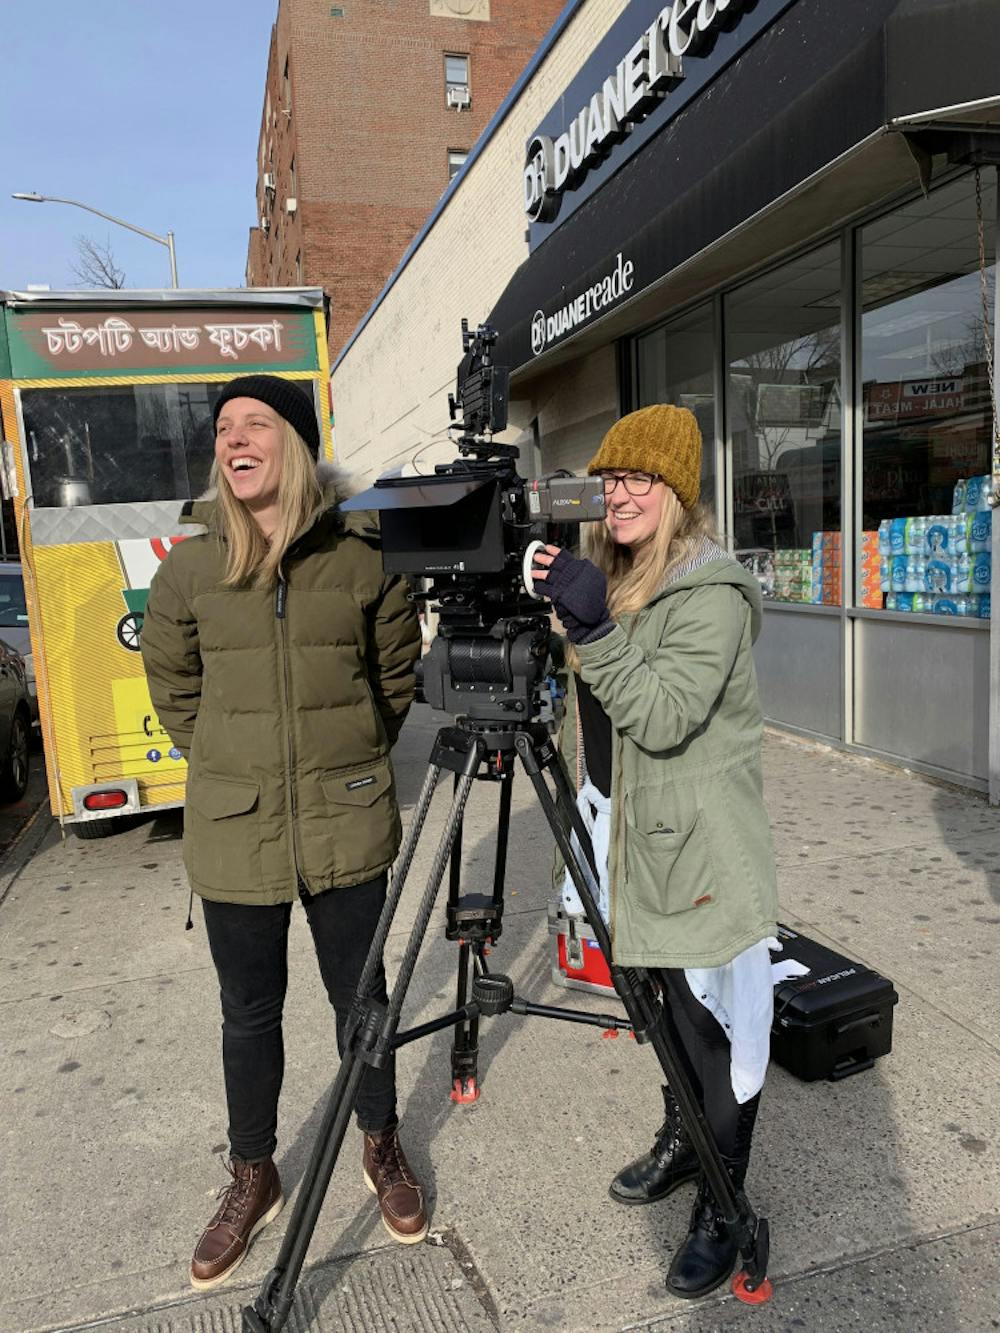 <p>Chloe Weaver (left) and Amanda Deery (right) on the set of “American.ish”. The livestream with Weaver marks the first in the College of Journalism and Communication’s new series, “Great Storytellers: Women and the Art of Film."</p>